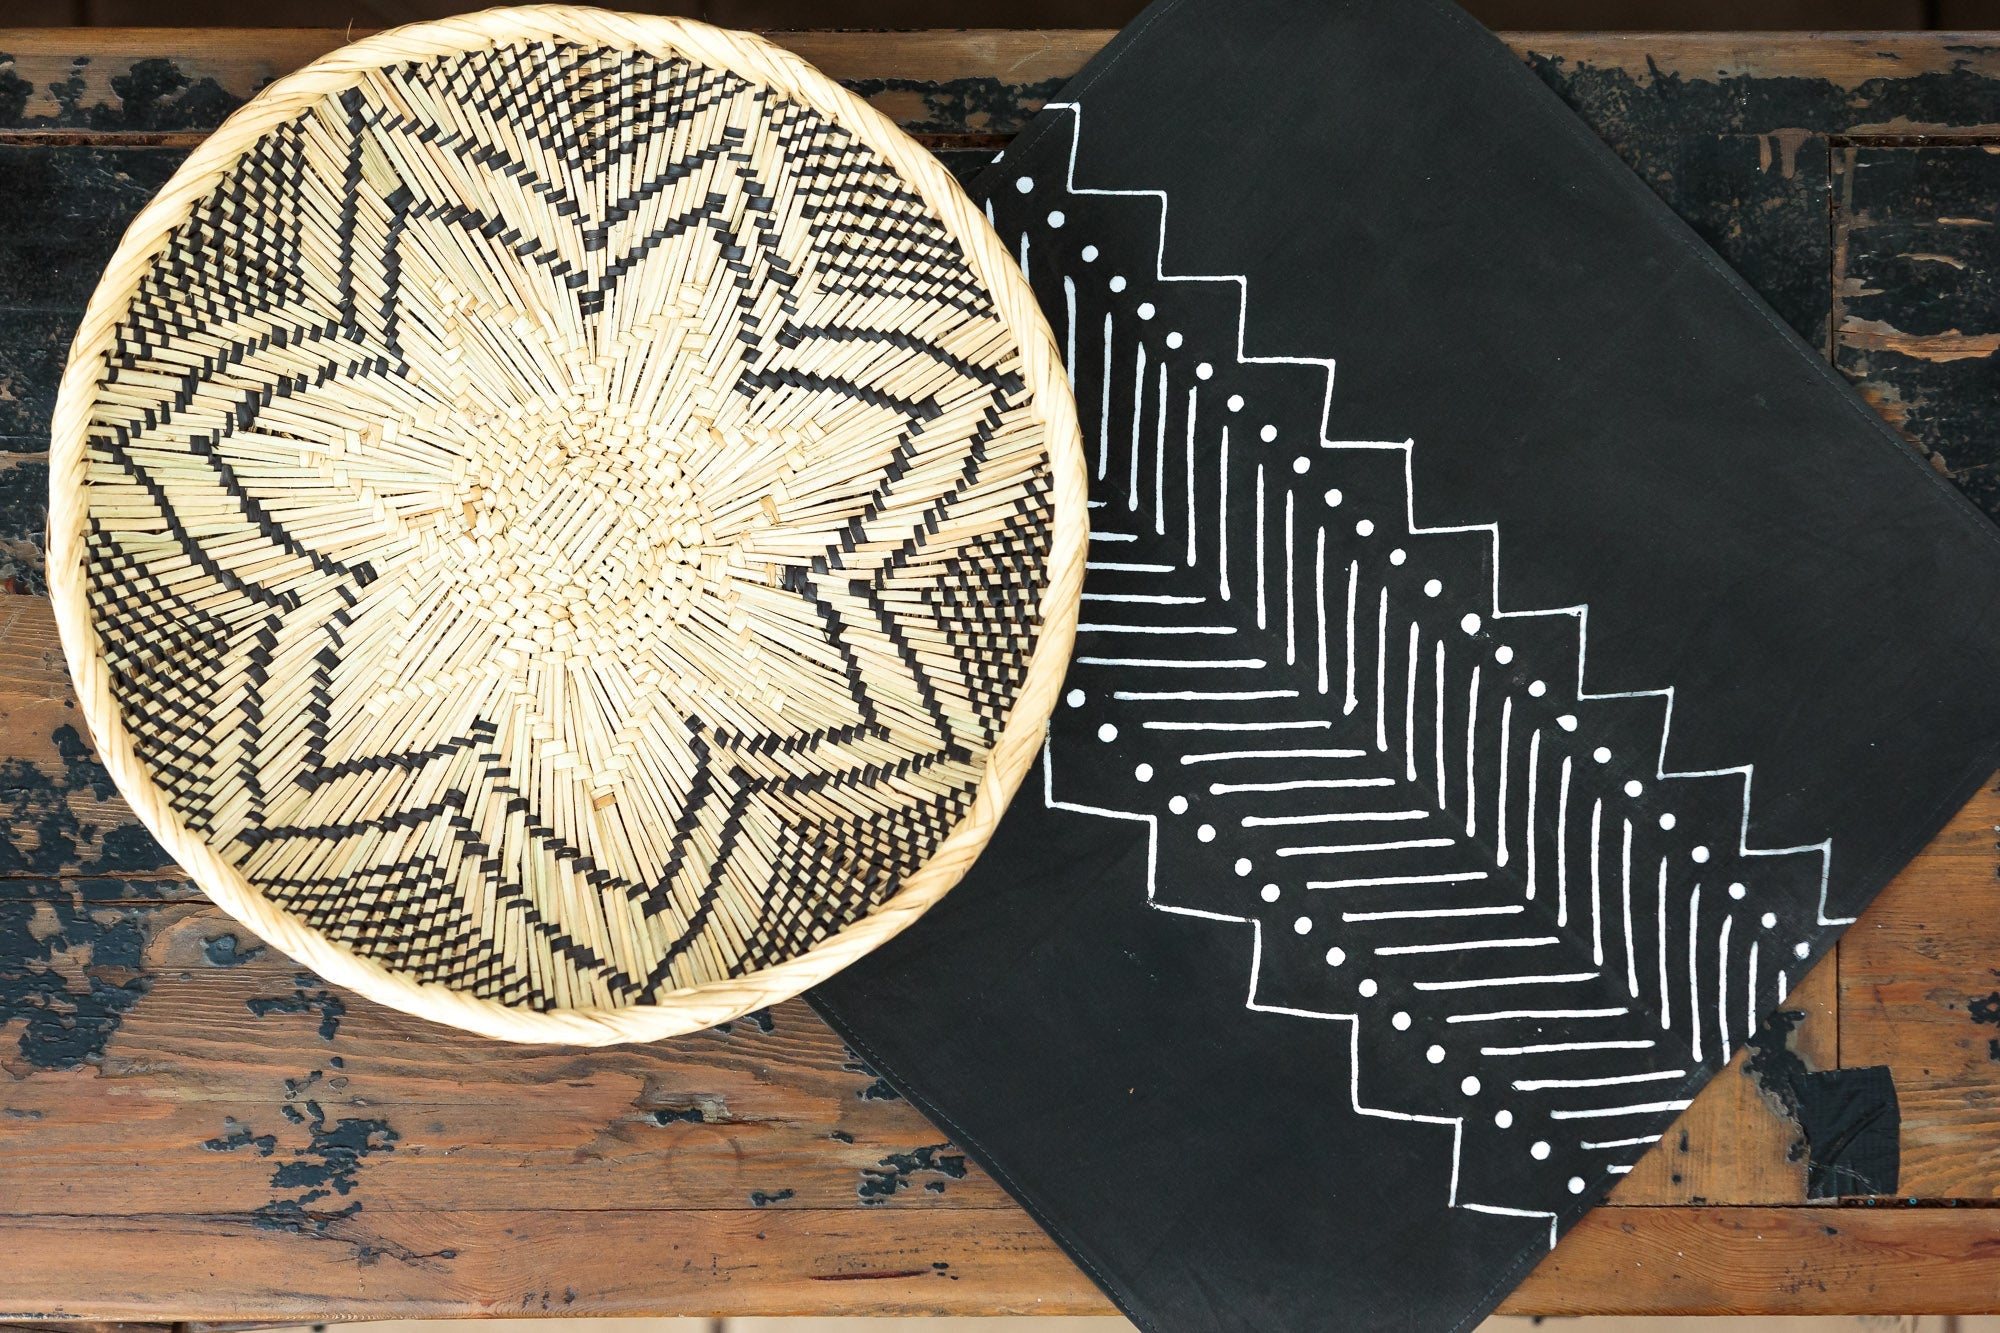 Matika Black Linear Napkin Set - Handmade by TRIBAL TEXTILES - Handcrafted Home Decor Interiors - African Made